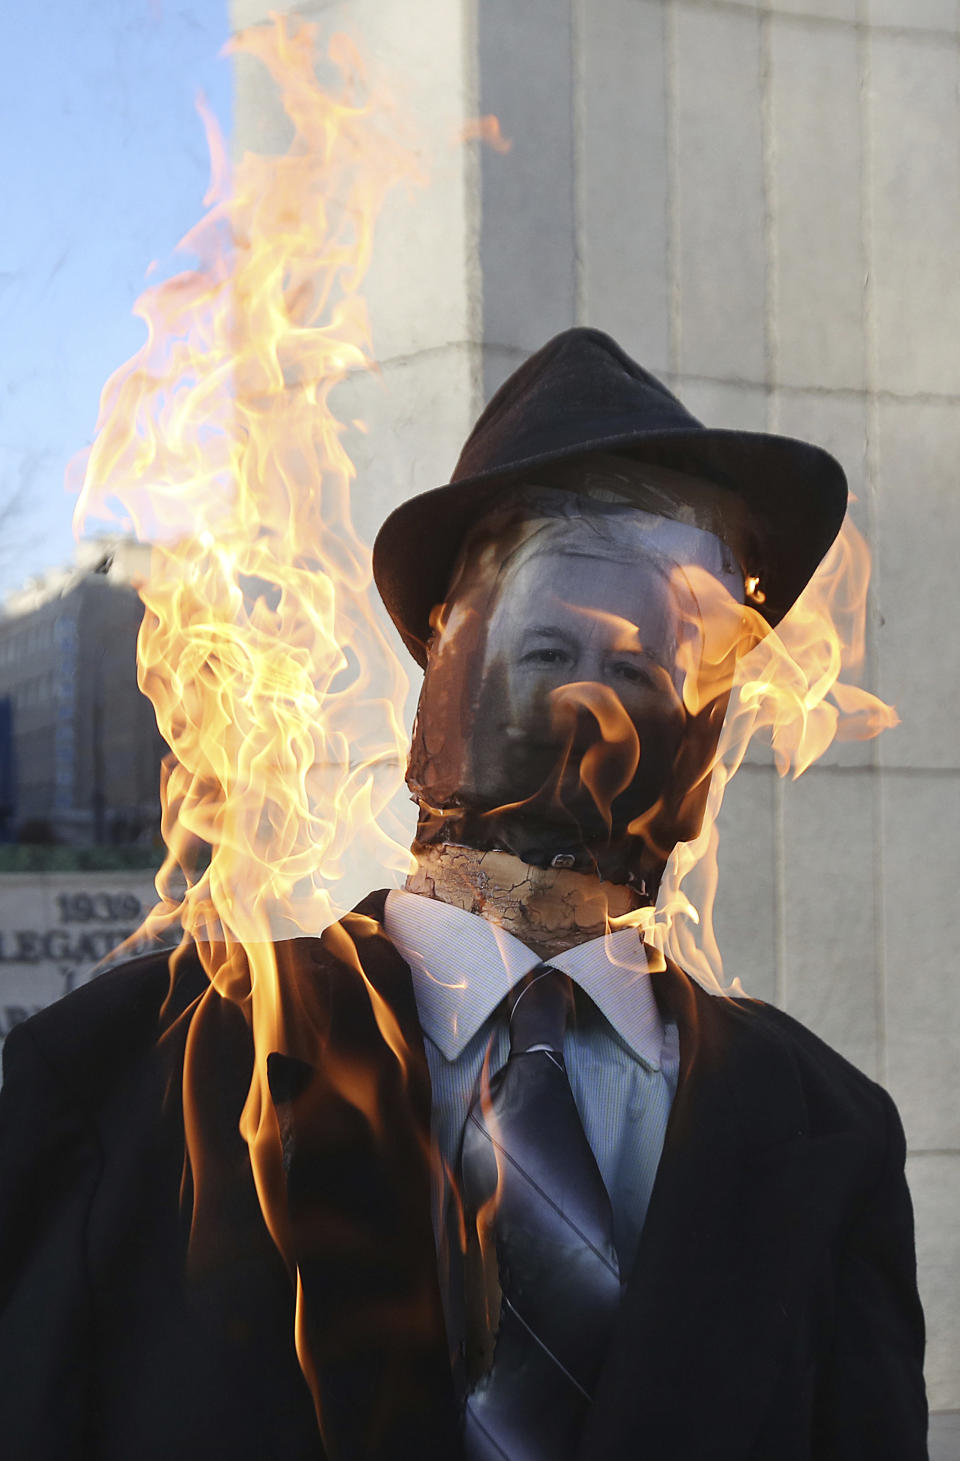 An effigy of Jaroslaw Kaczynski, the powerful head of Poland's ruling conservative Law and Justice party is burning before the parliament building in Warsaw, Poland, Tuesday, Dec. 13, 2016, the 35th anniversary of the imposition of martial law clampdown. A government opponent protests the ruling party's policy saying it does not protect families in trouble. (AP Photo/Czarek Sokolowski)